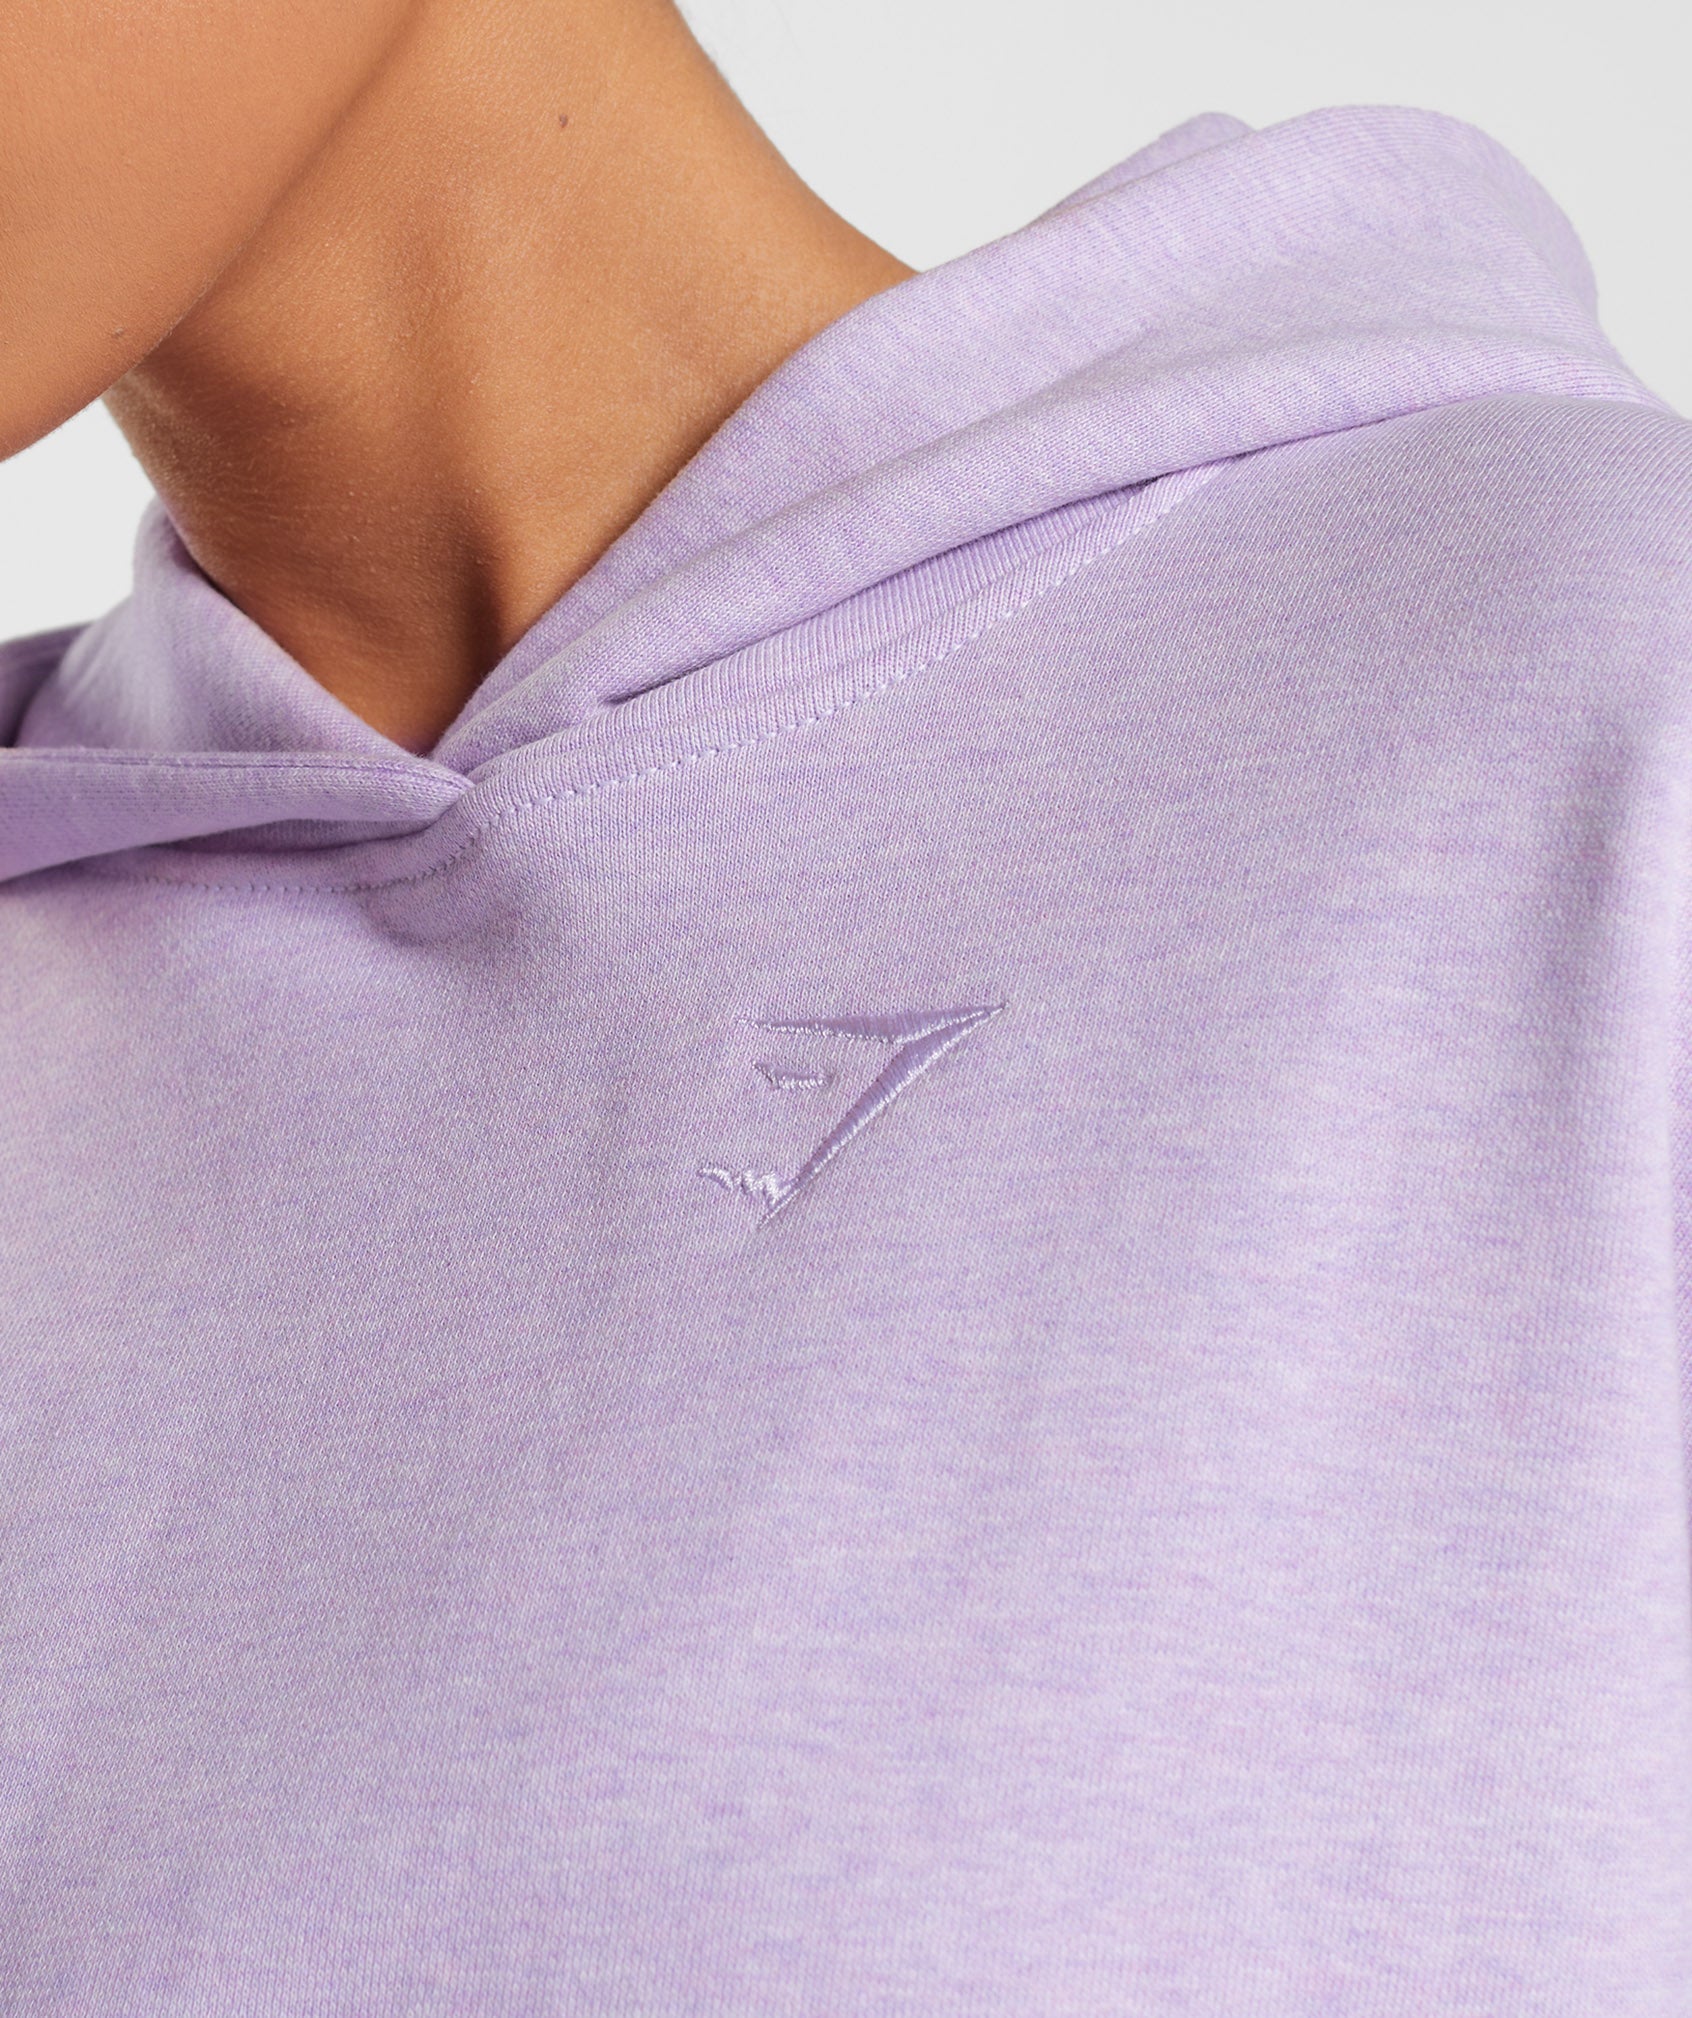 Rest Day Sweats Hoodie in Aura Lilac Marl - view 6